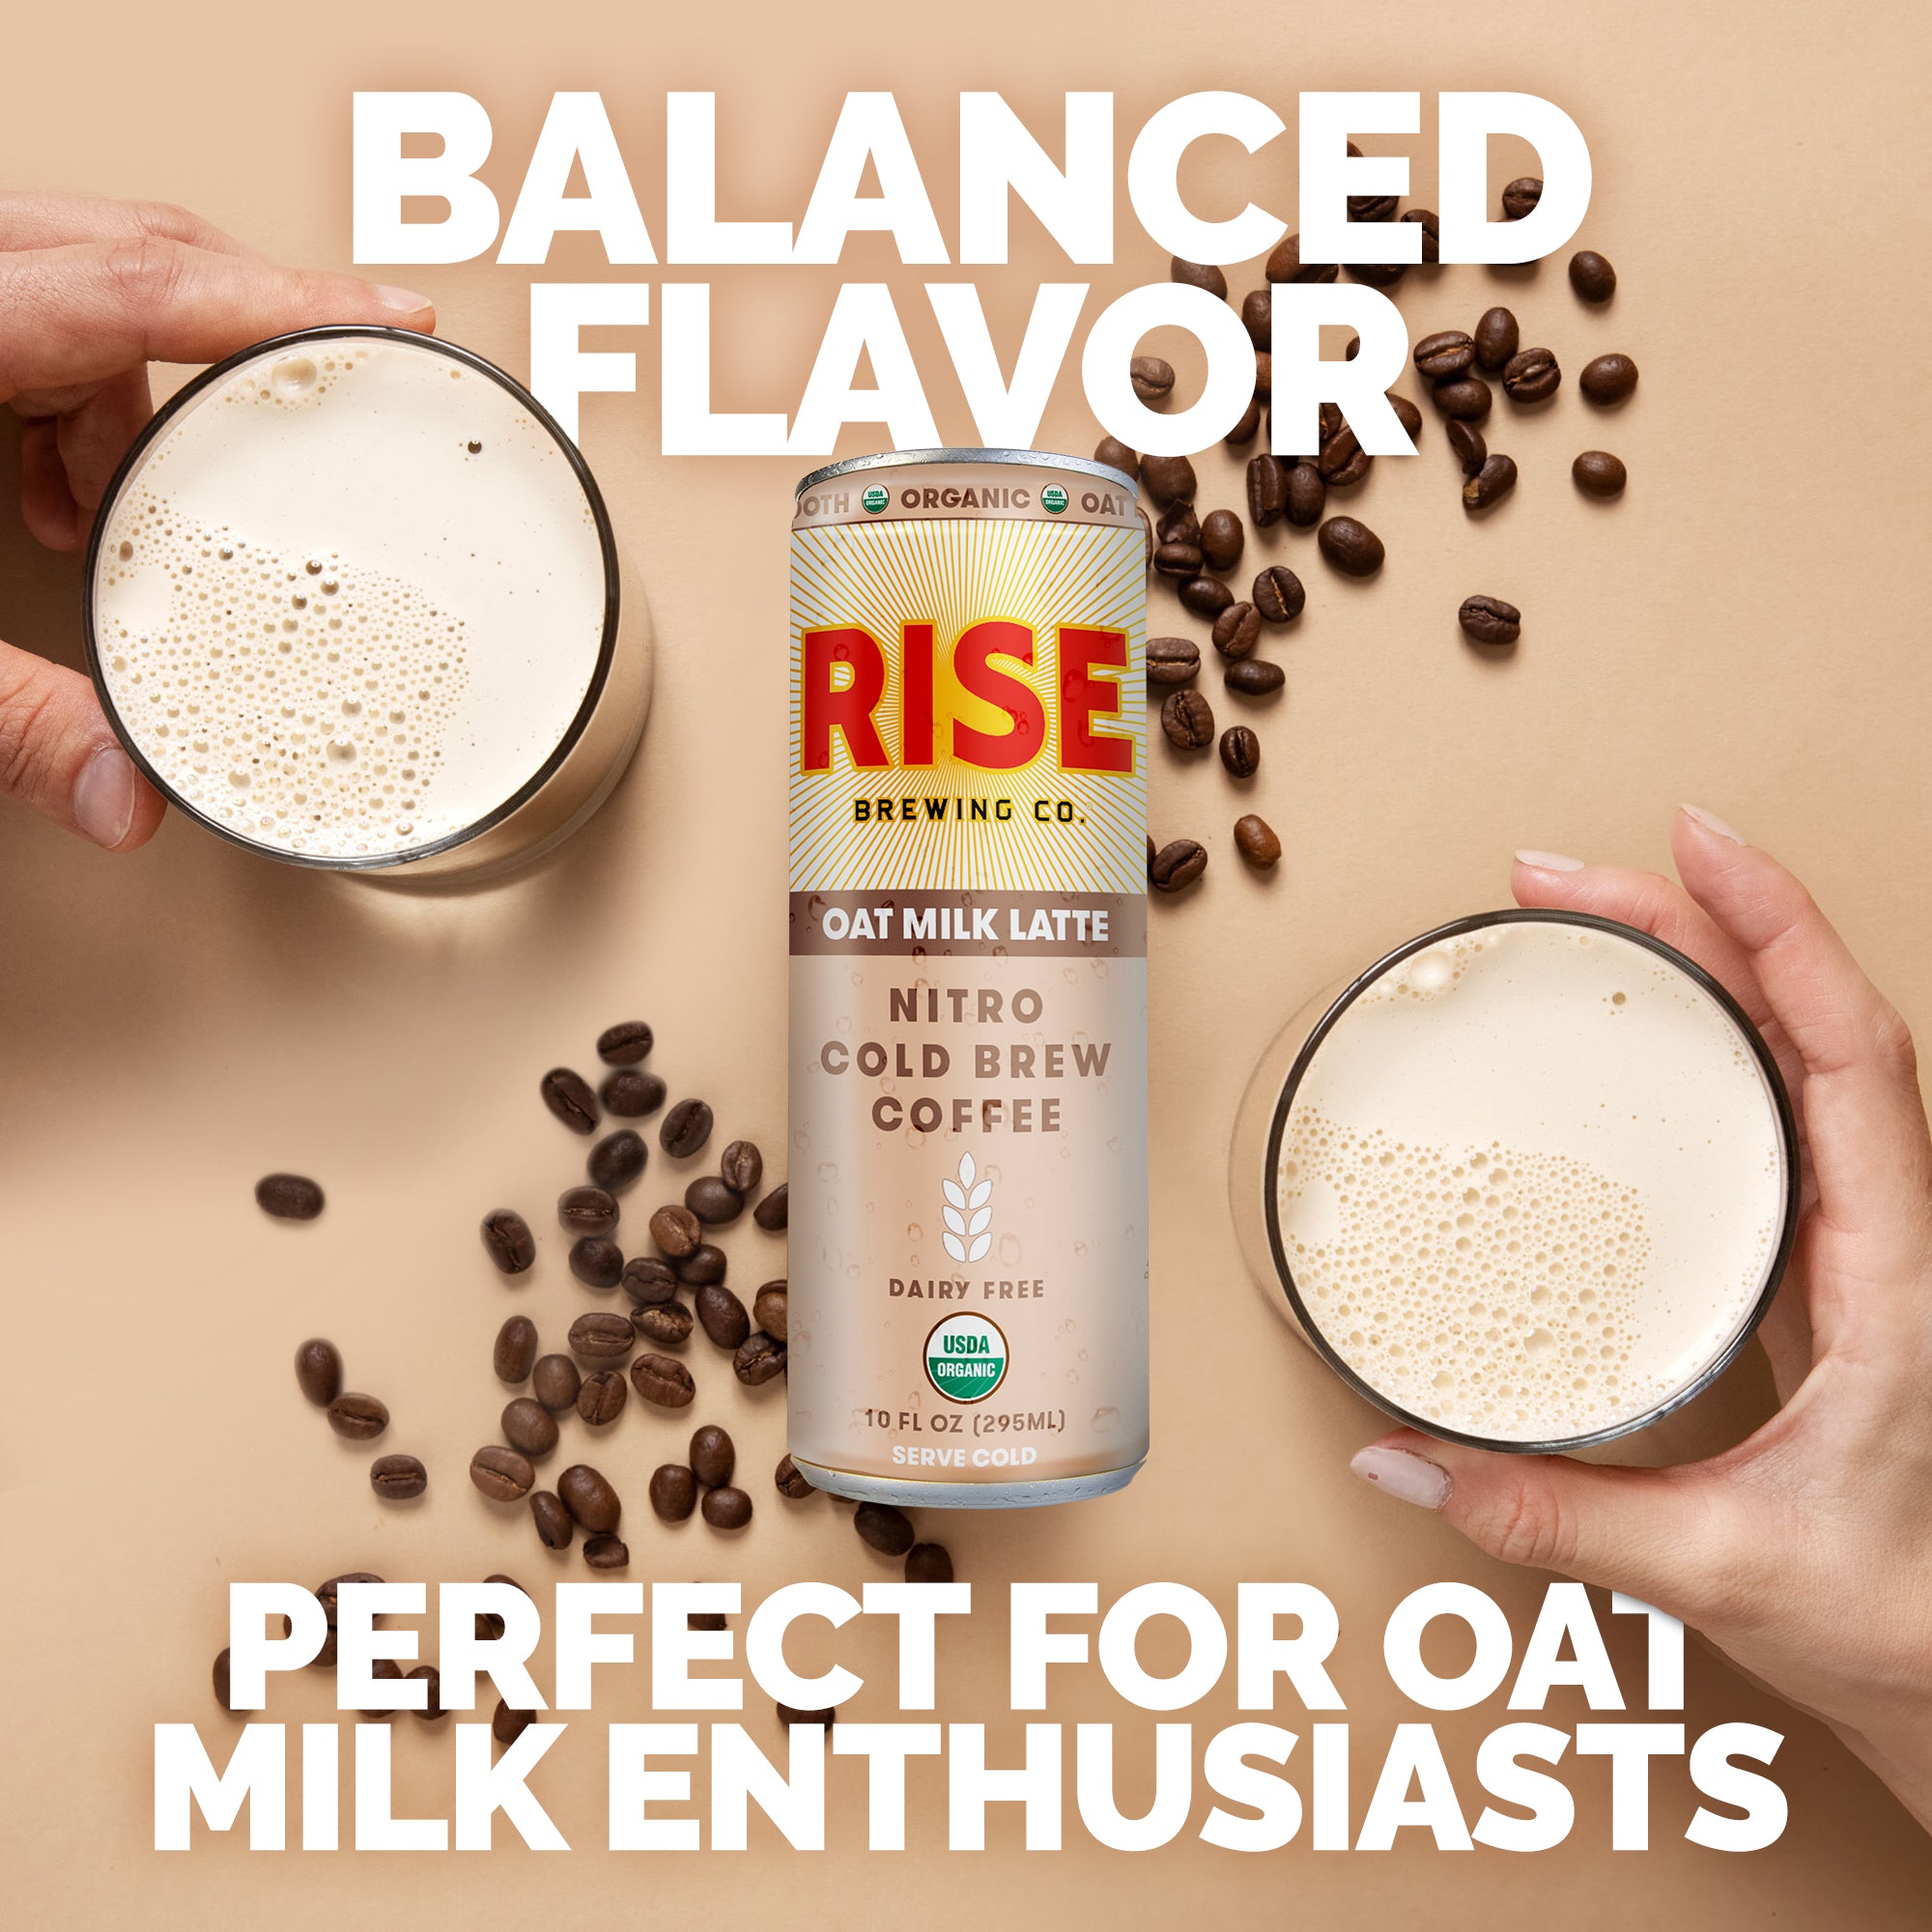 Balanced Flavor, perfect for oat milk enthusiasts. RISE Brewing Co. Oat Milk Latte Nitro Cold Brew